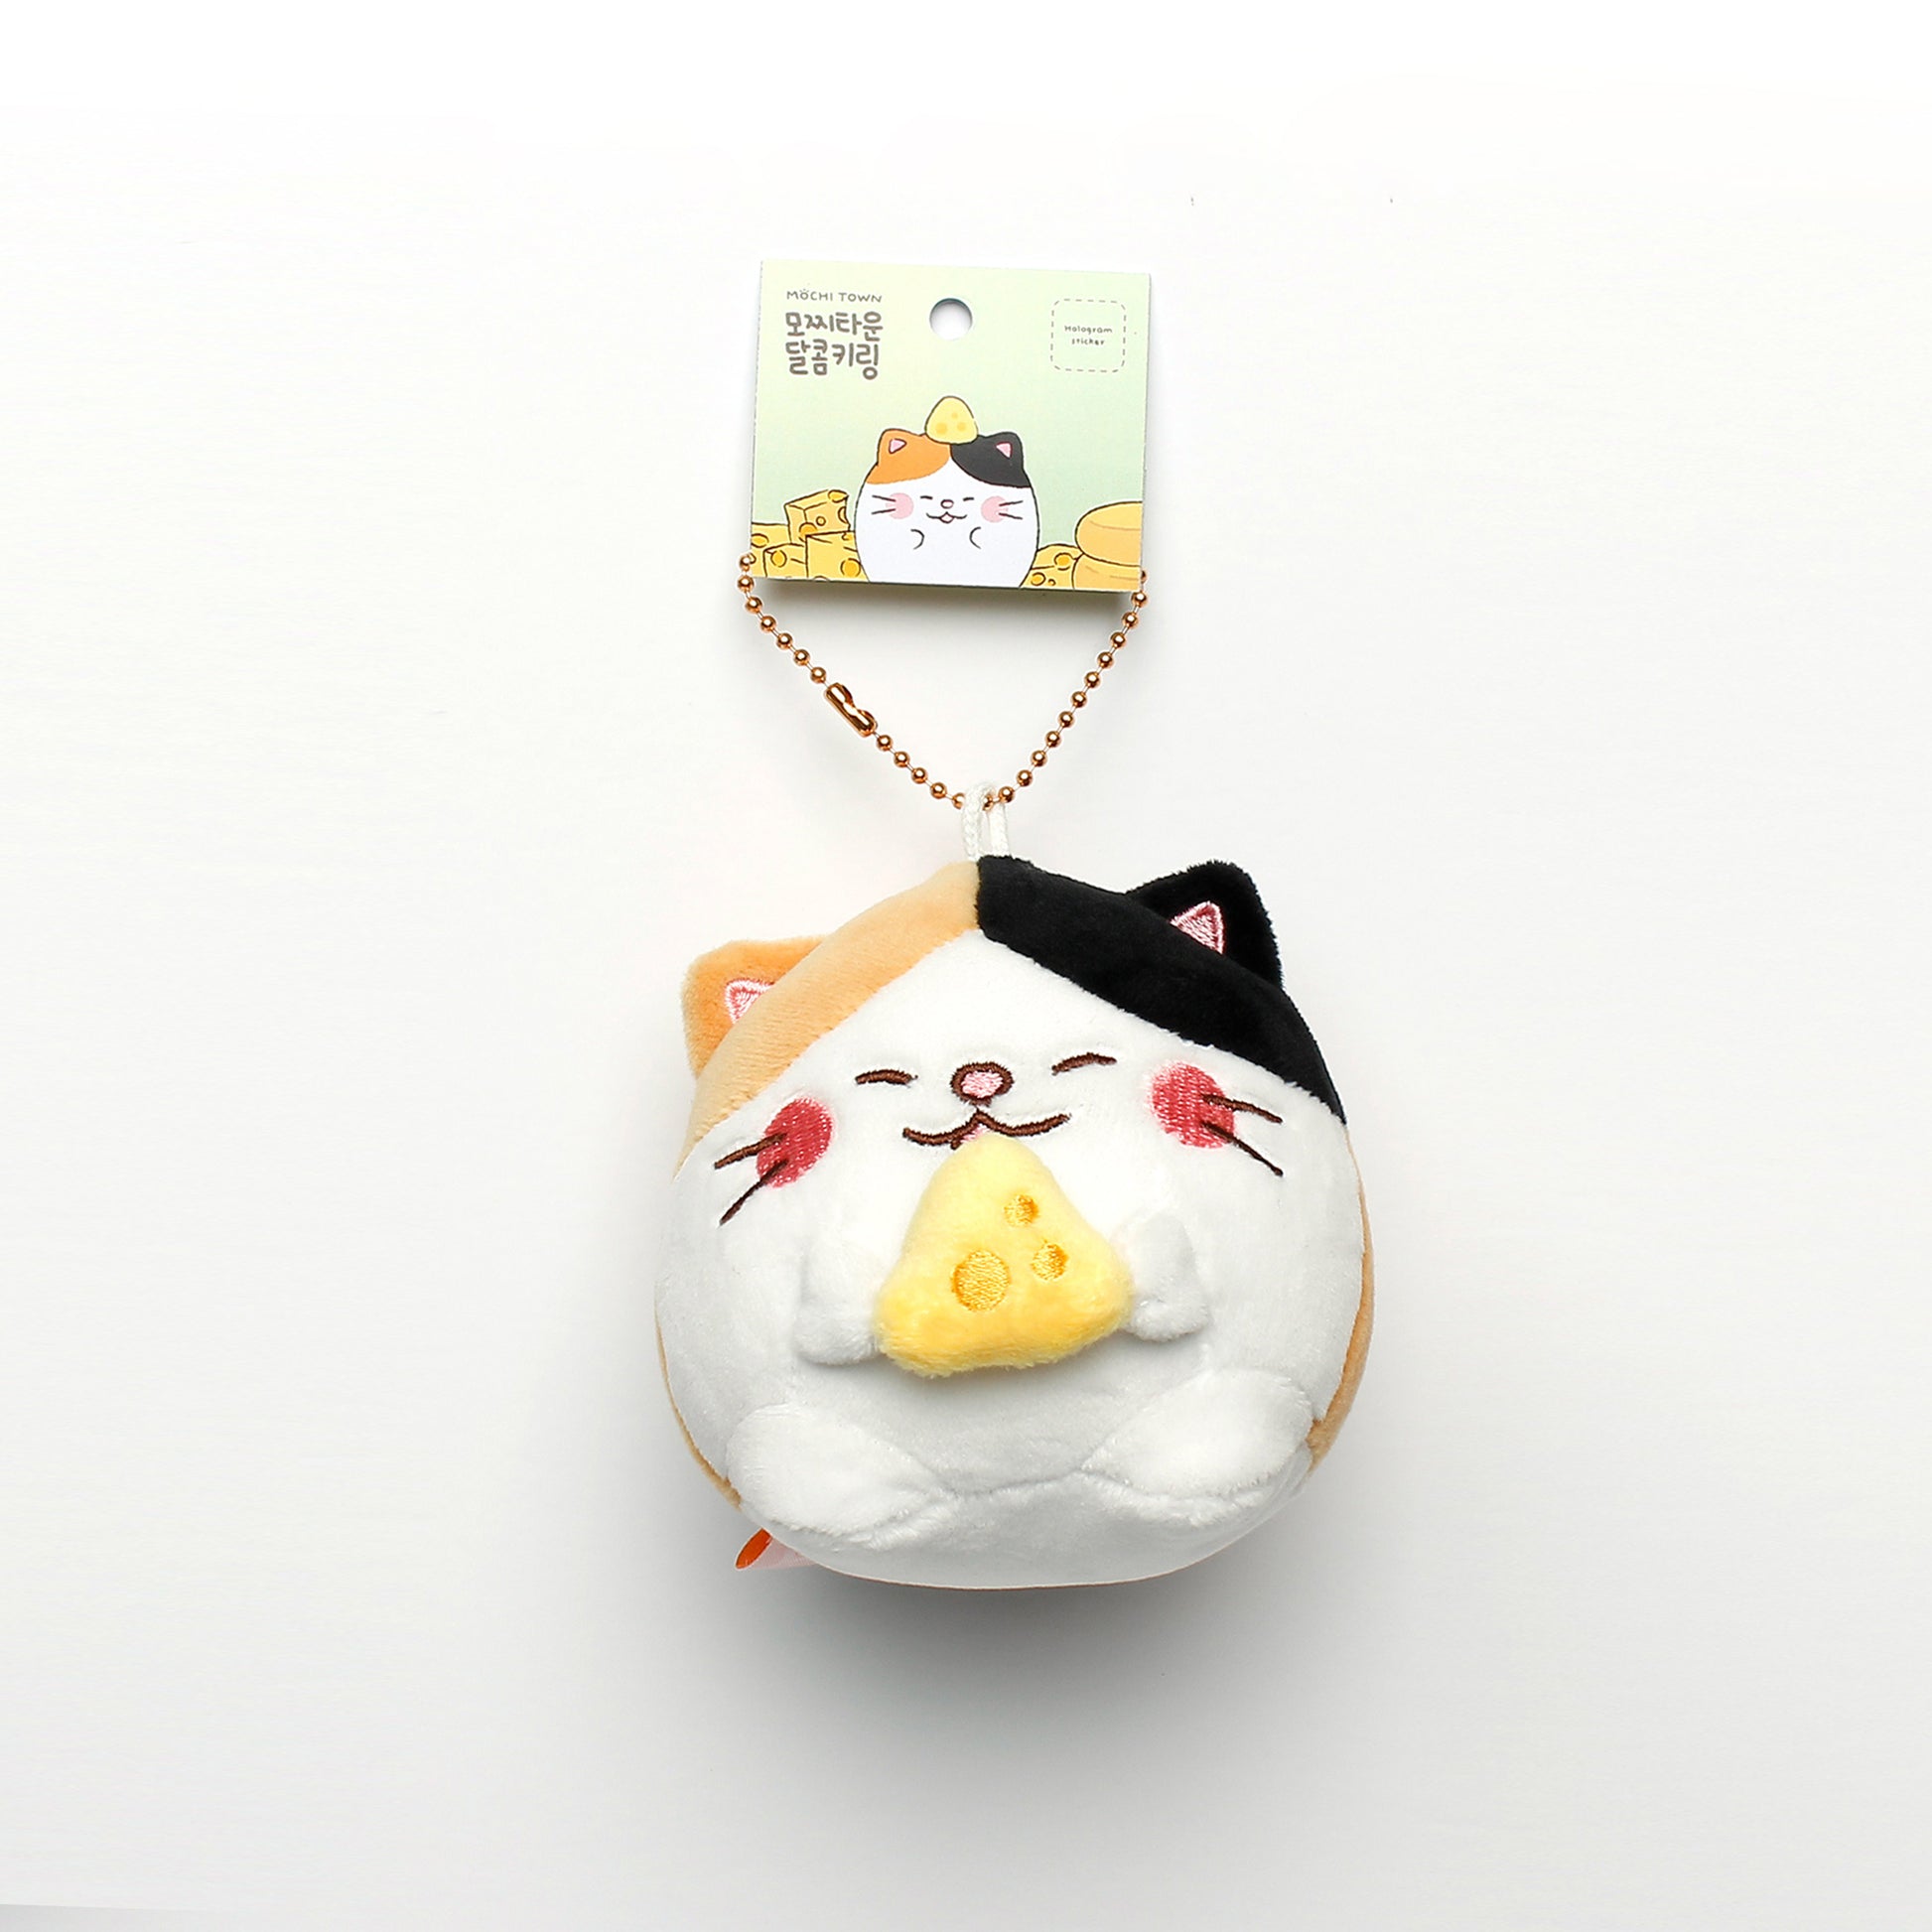 Camang (calico cat with cheese) keyring hanging from tag on white background.